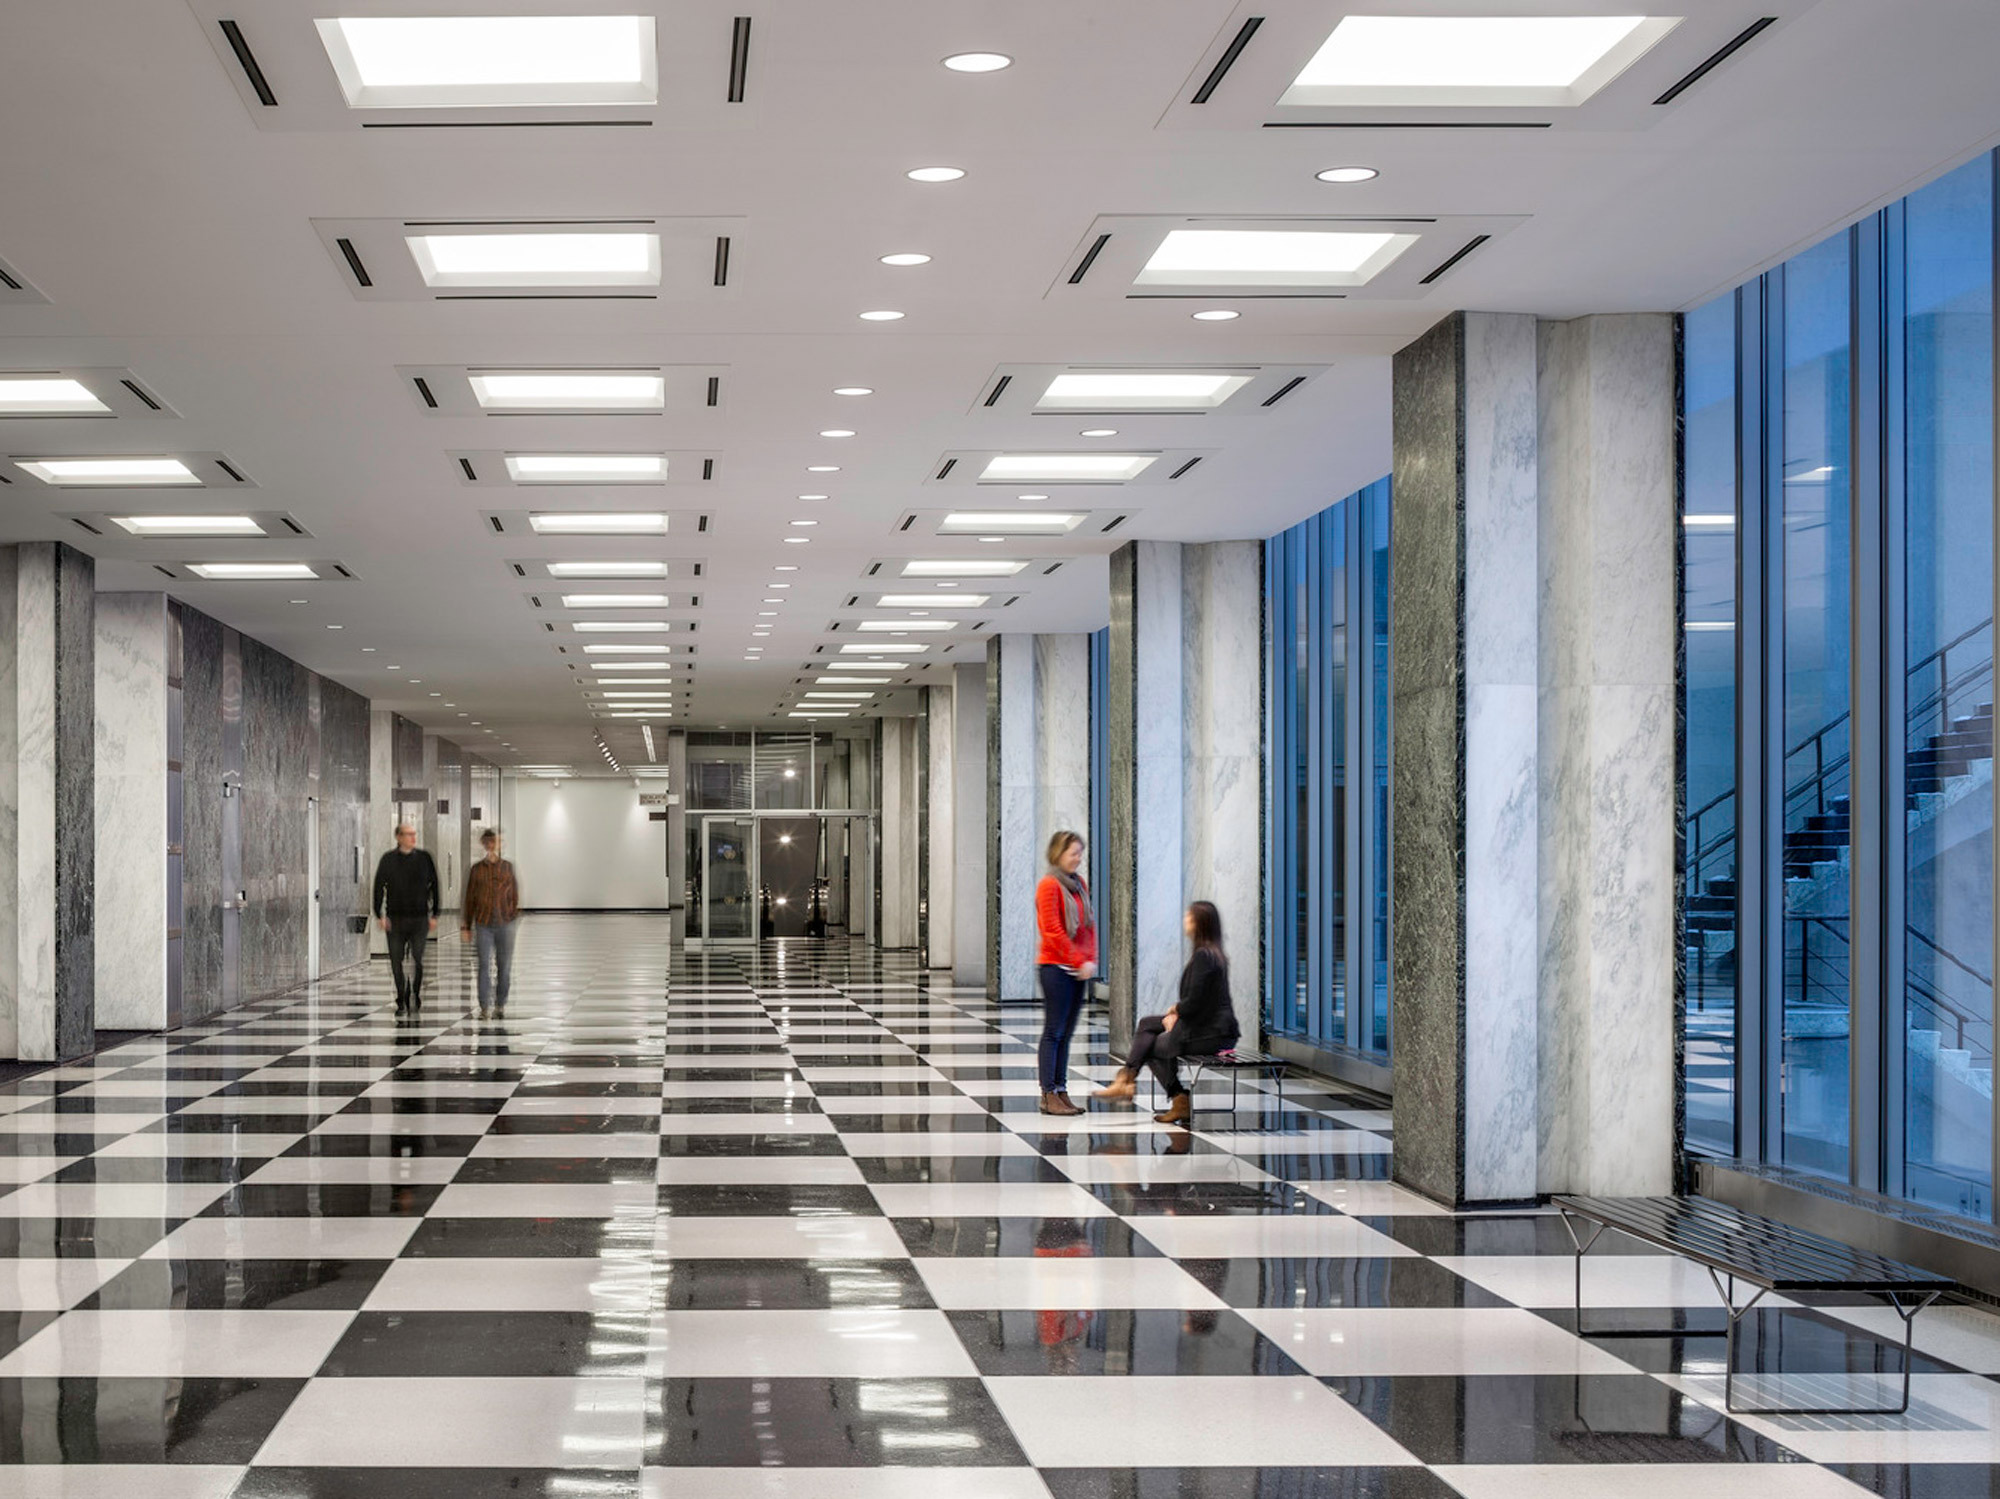 Modern commercial lobby with monochromatic checkered flooring, sleek marble columns, ample ceiling-mounted lighting fixtures, and full-height glass windows emitting natural light. People are walking and conversing, adding human scale to the space.